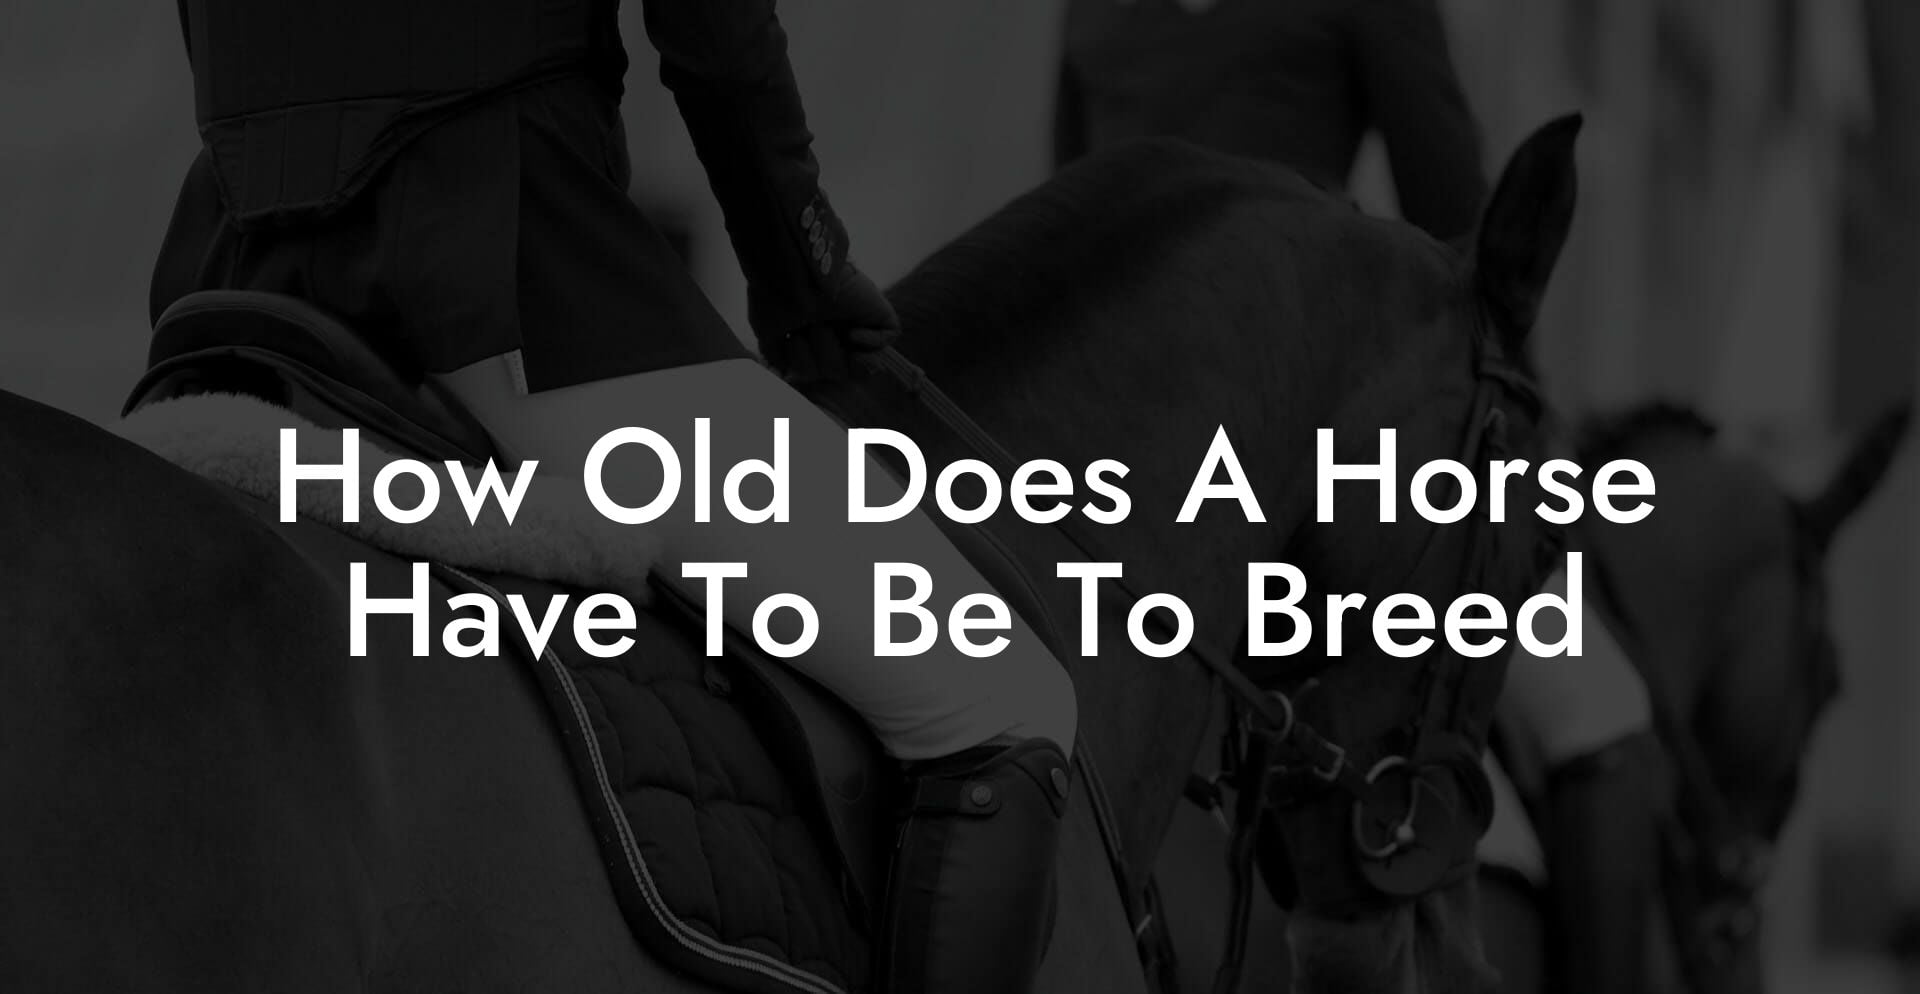 How Old Does A Horse Have To Be To Breed